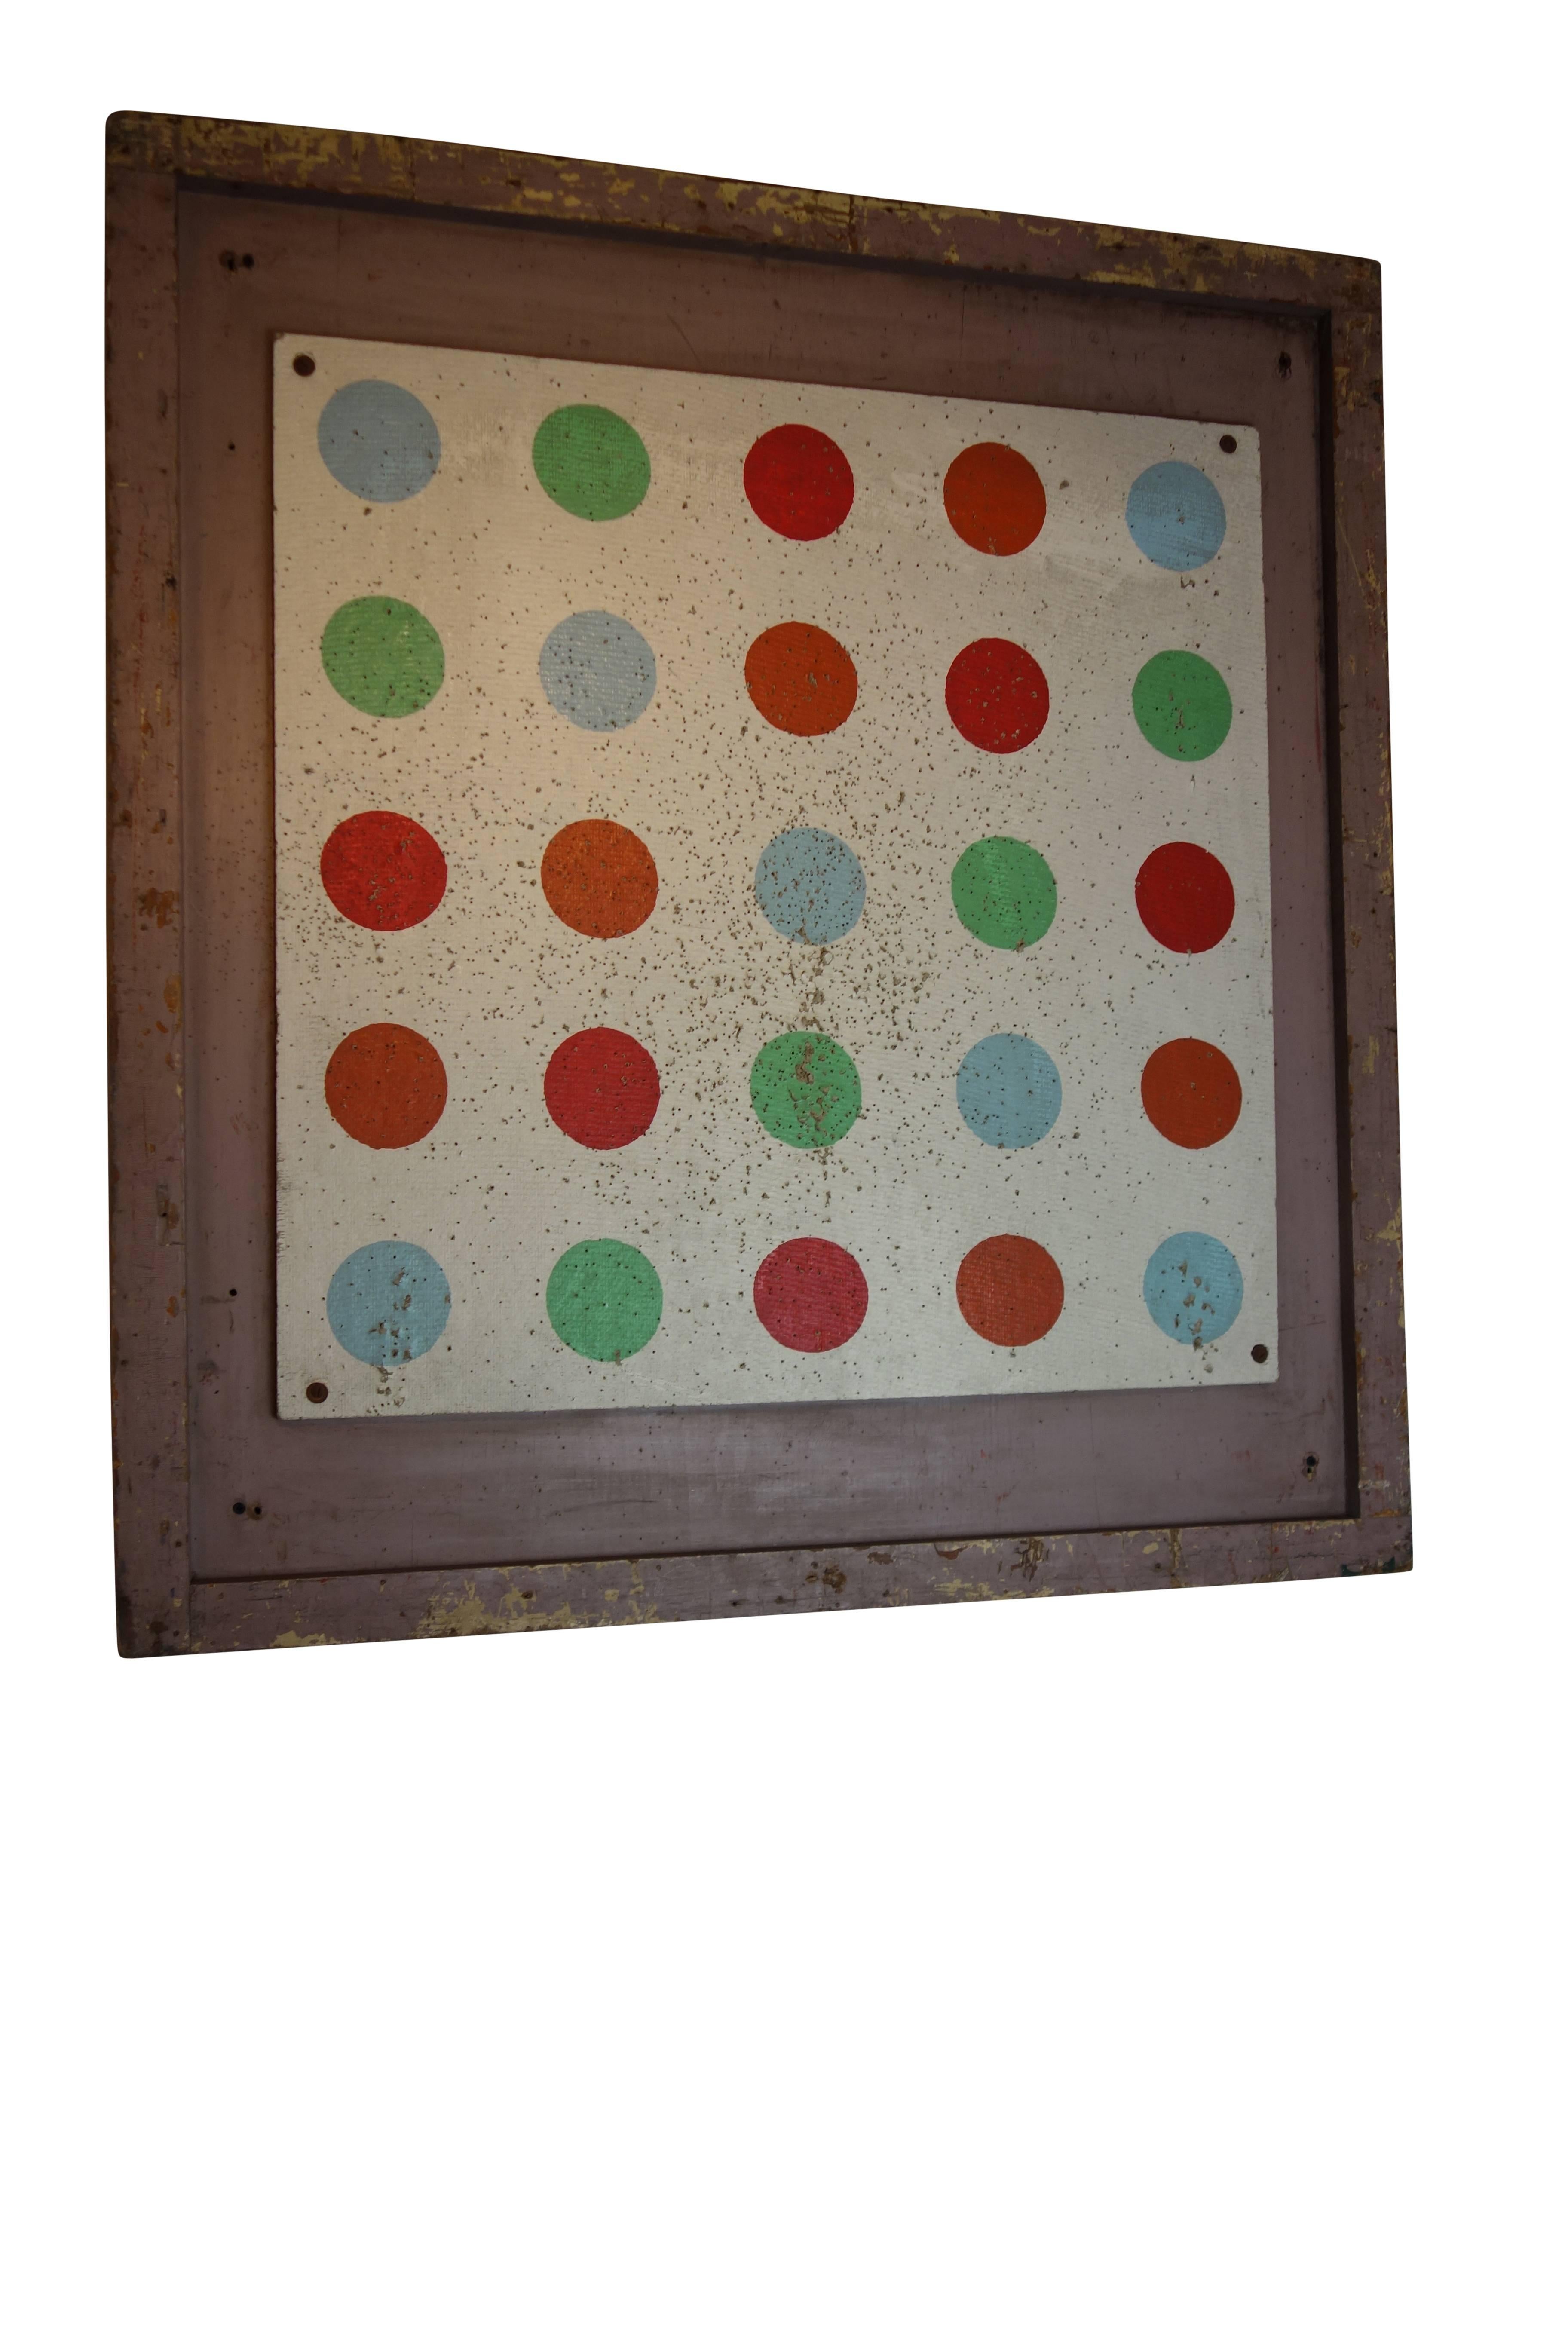 This is a balloon dart board panel on its original painted wood frame from a carnival in Riverside Park, Wisconsin, circa 1920. The brightly colored polka dots give it a modern pop art feel.  There is a slightly larger pair to this panel, see other